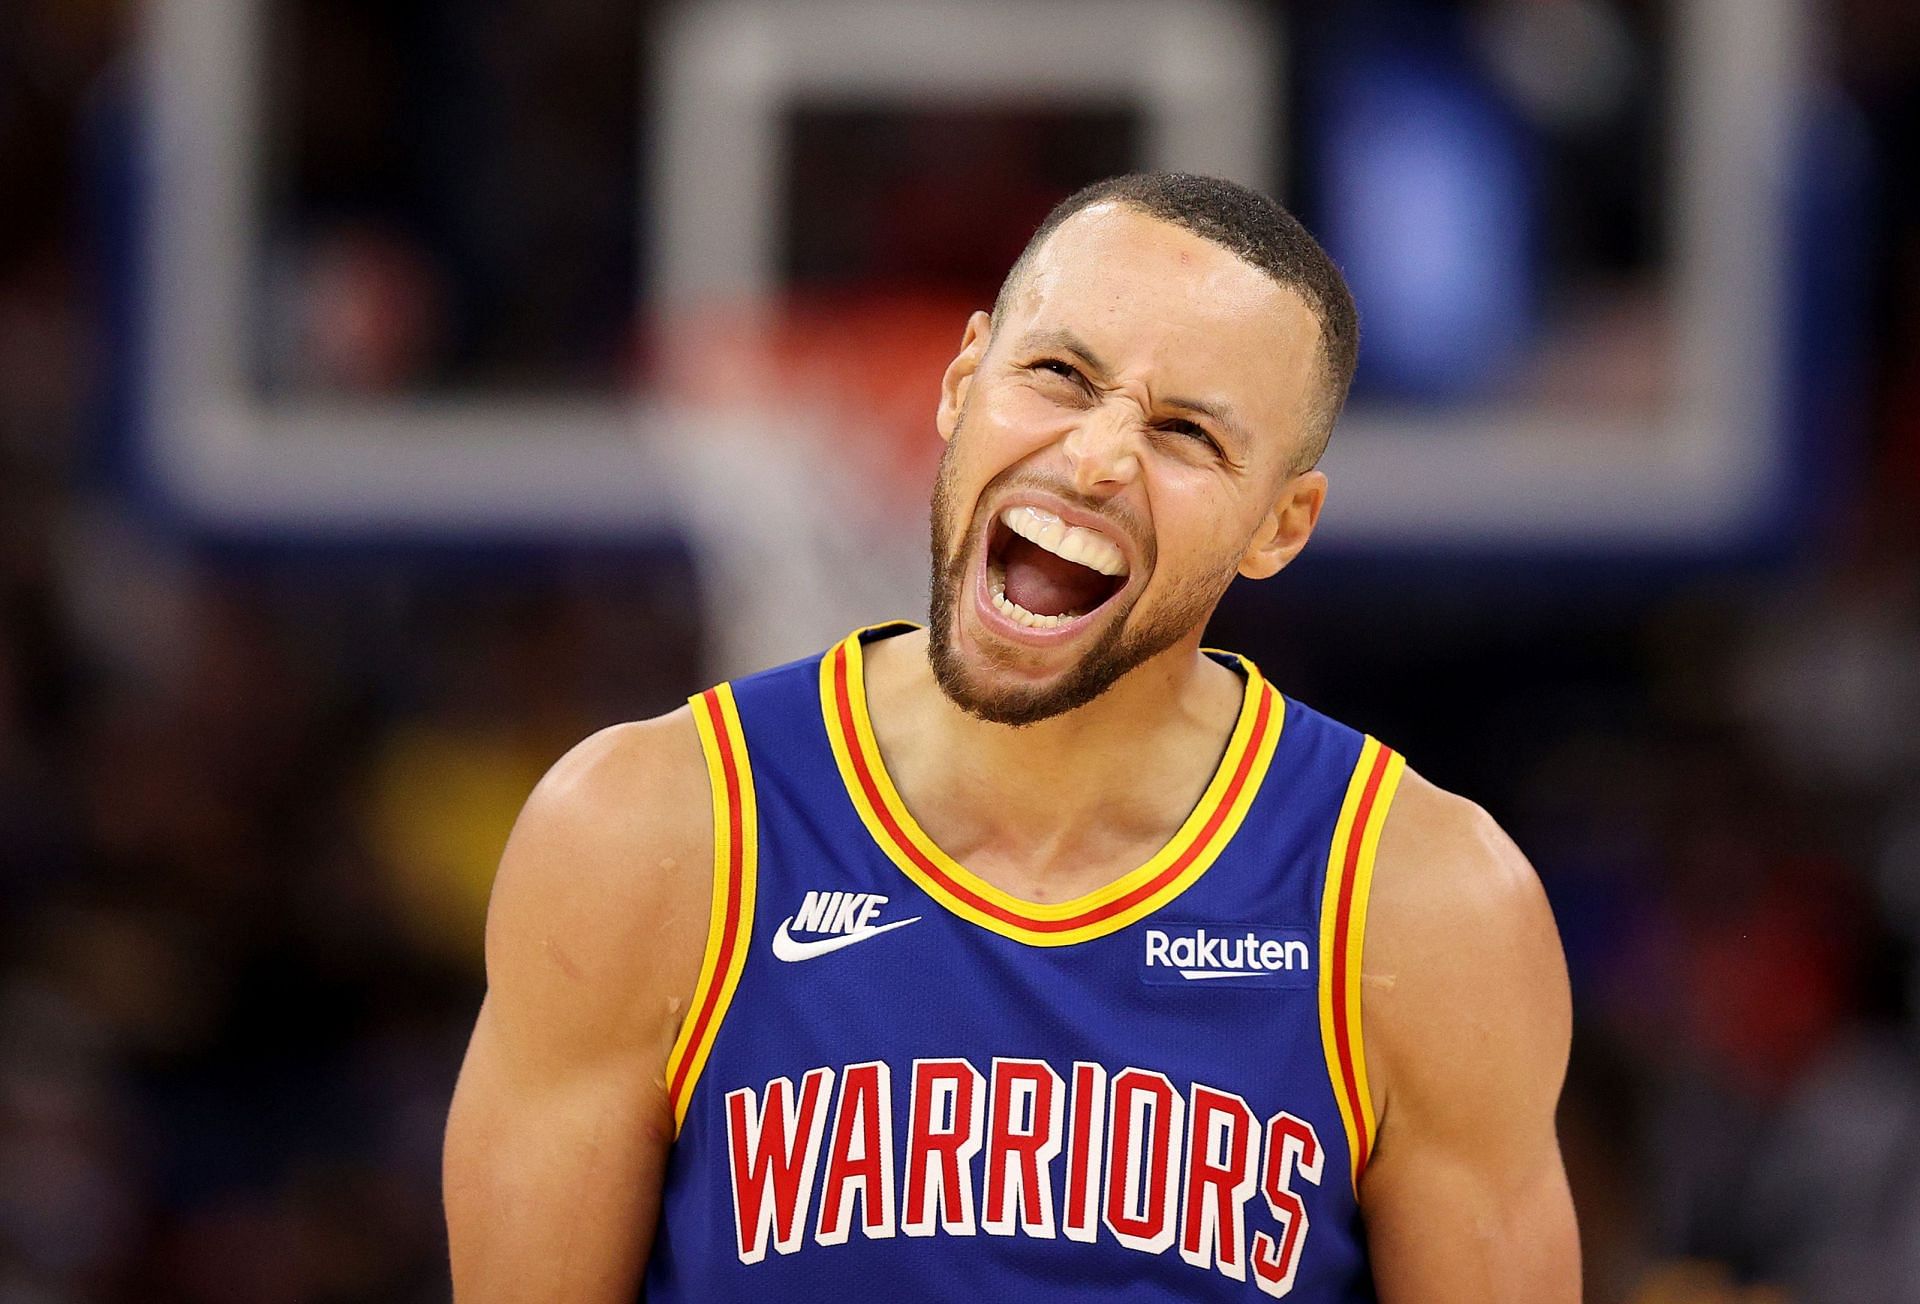 Stephen Curry overtakes Ray Allen for NBA's all-time 3-point lead